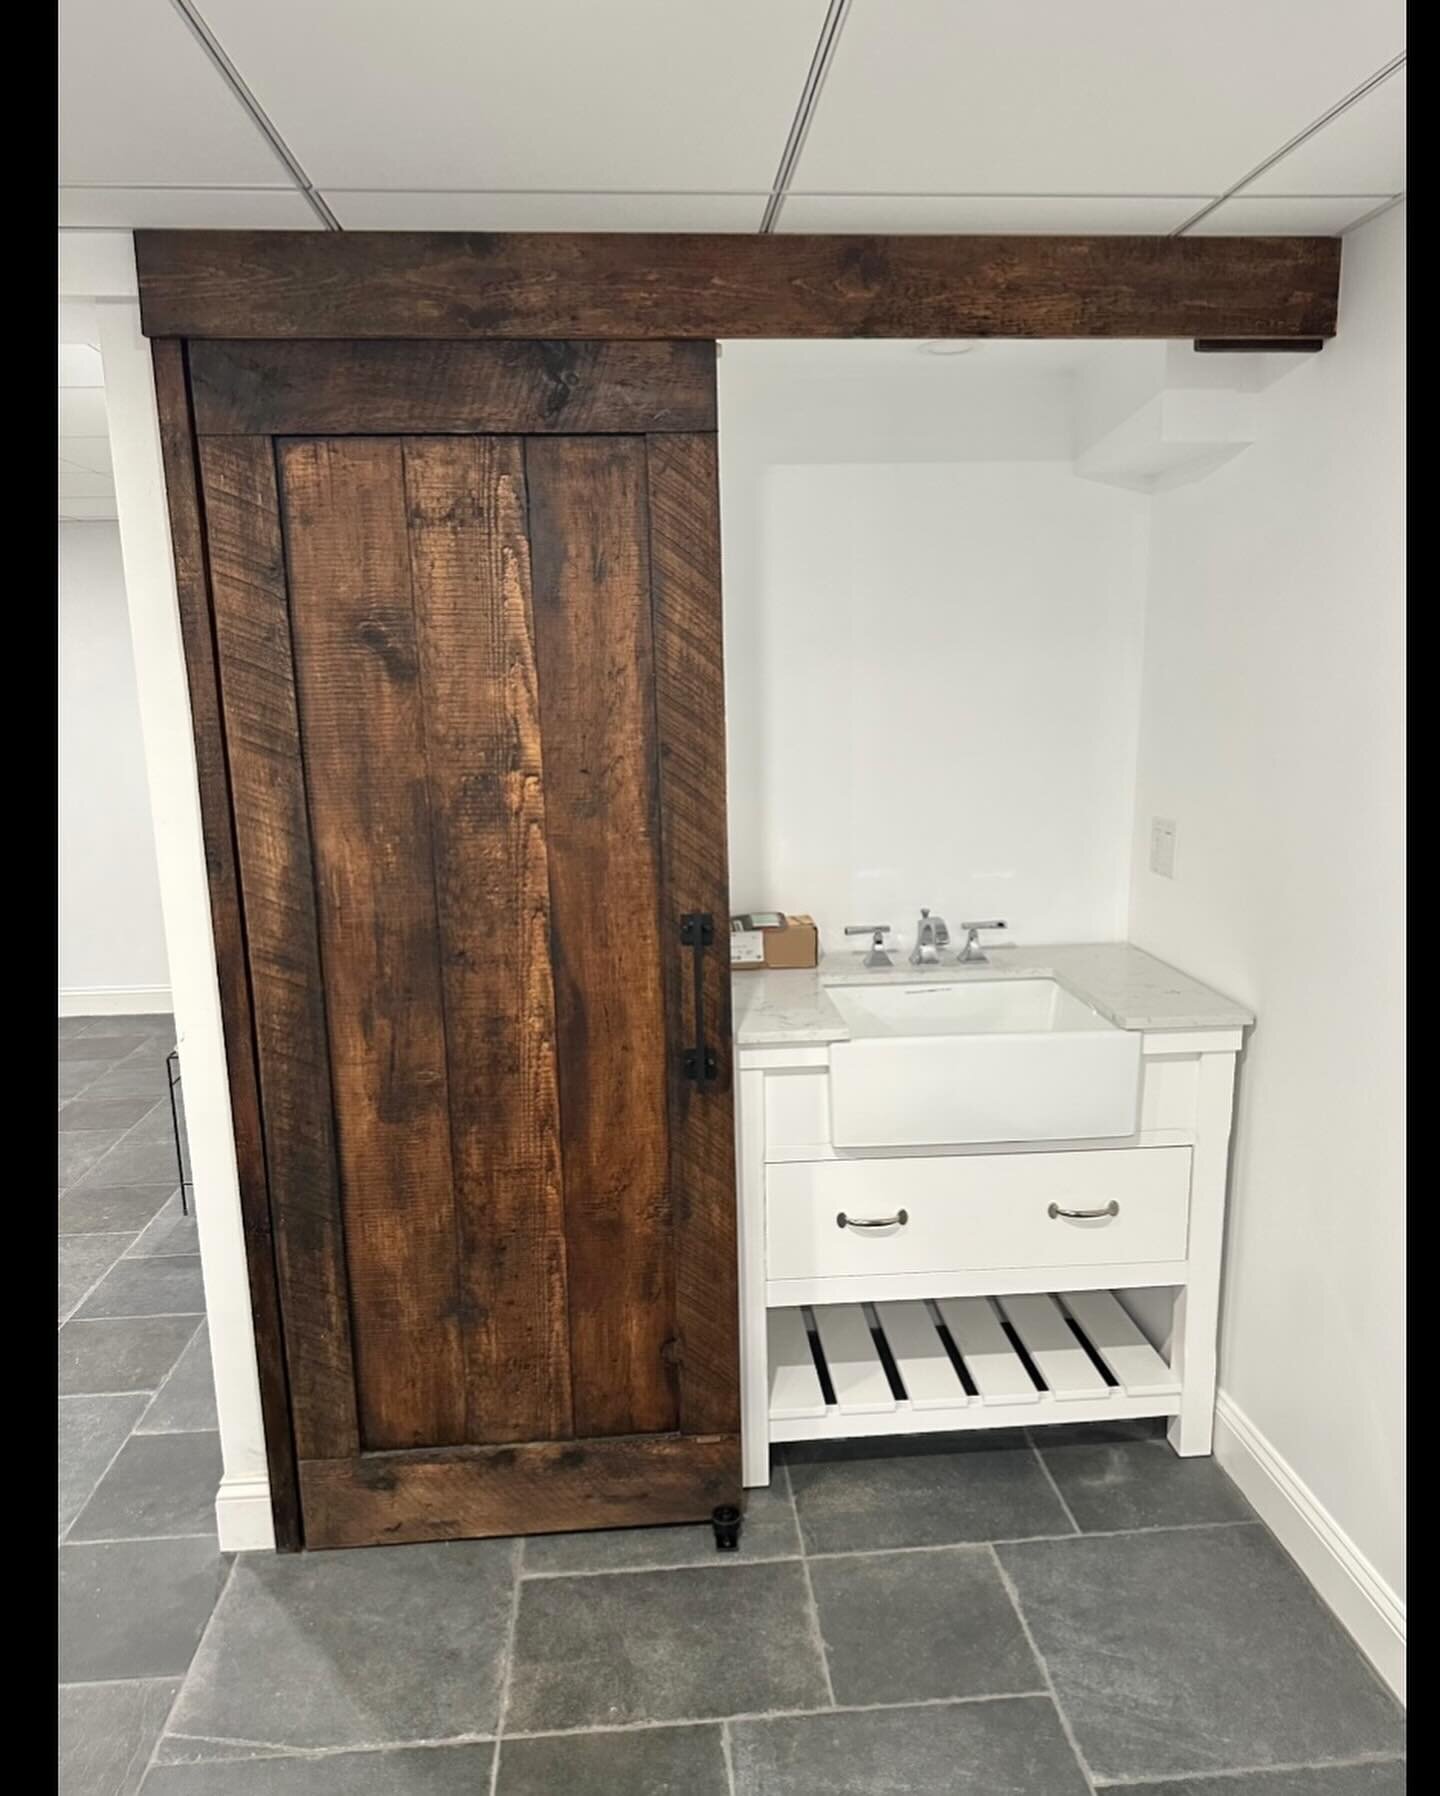 Pete and Deana from Beverly hired a local builder/craftsman to install a hidden track for this rustic brown barn door slab made by The Barndoorist to be 1-3/4&rdquo; thick. 

The door would cover the newly finished basement laundry alcove when closed